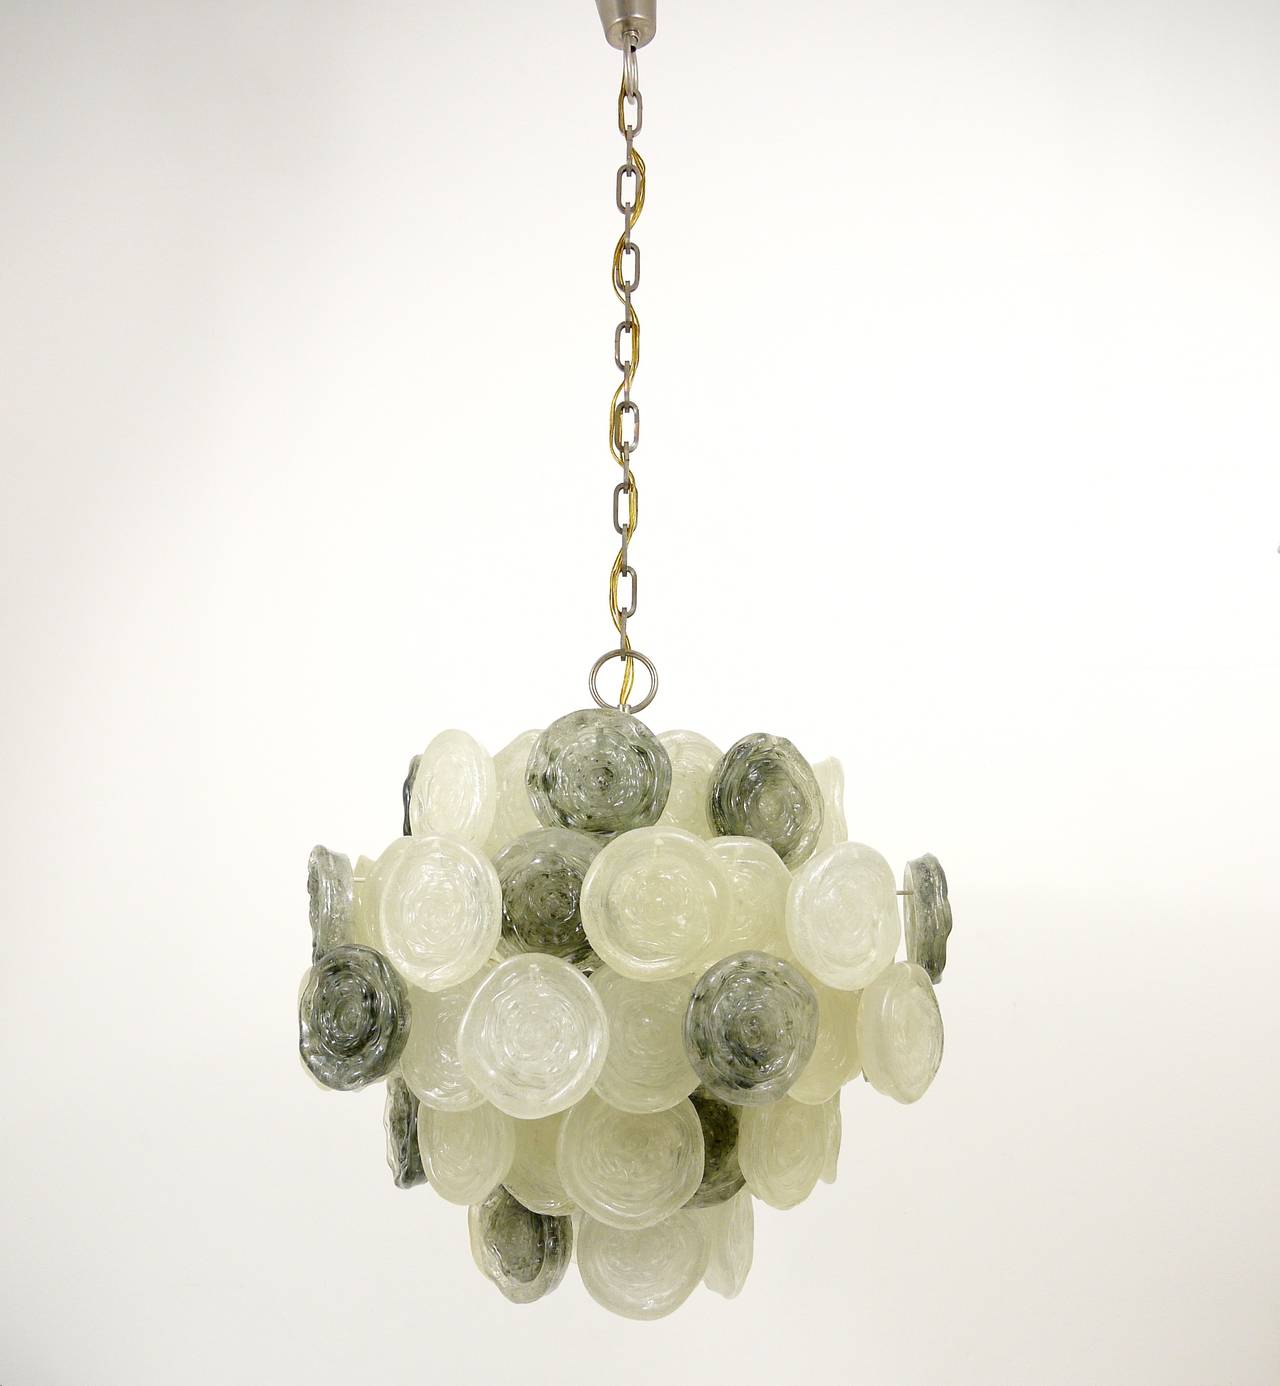 A beautiful Midcentury lucite chandelier, Italy, 1960s. Five tiers of big and solid plastic discs on a white metal base and a nickel-plated chain. In very good condition with nice patina on the chain. 

measurements: diameter 23